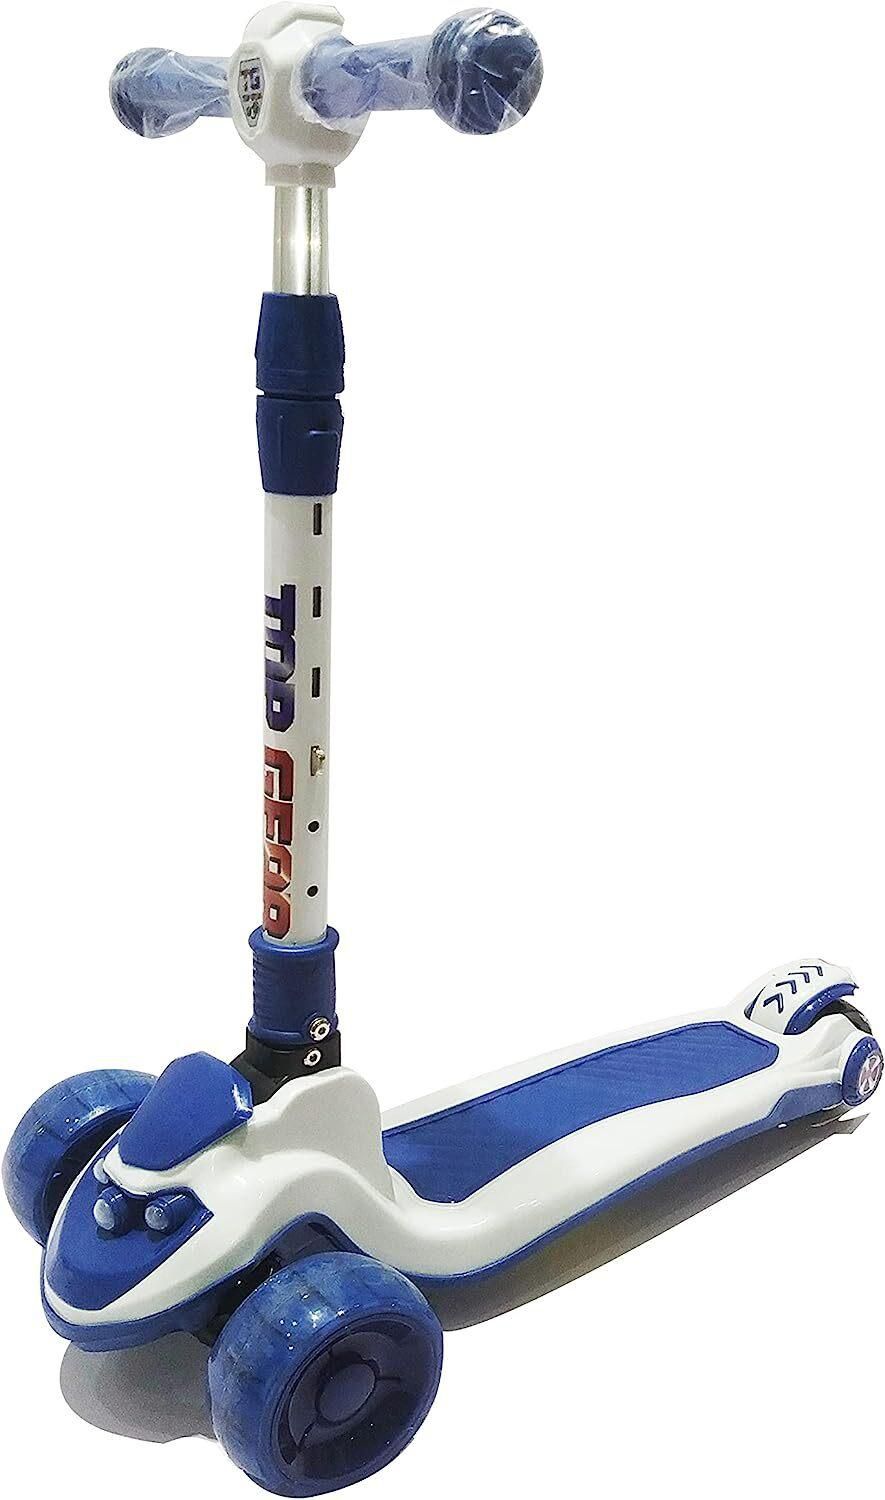 Top Gear Kick Scooter 670 For Kids, Toddler Scooter For Ages 3-5, Music &amp; Light Kids Kick Scooter With Foldable, 3 Wheels Scooter (Blue)